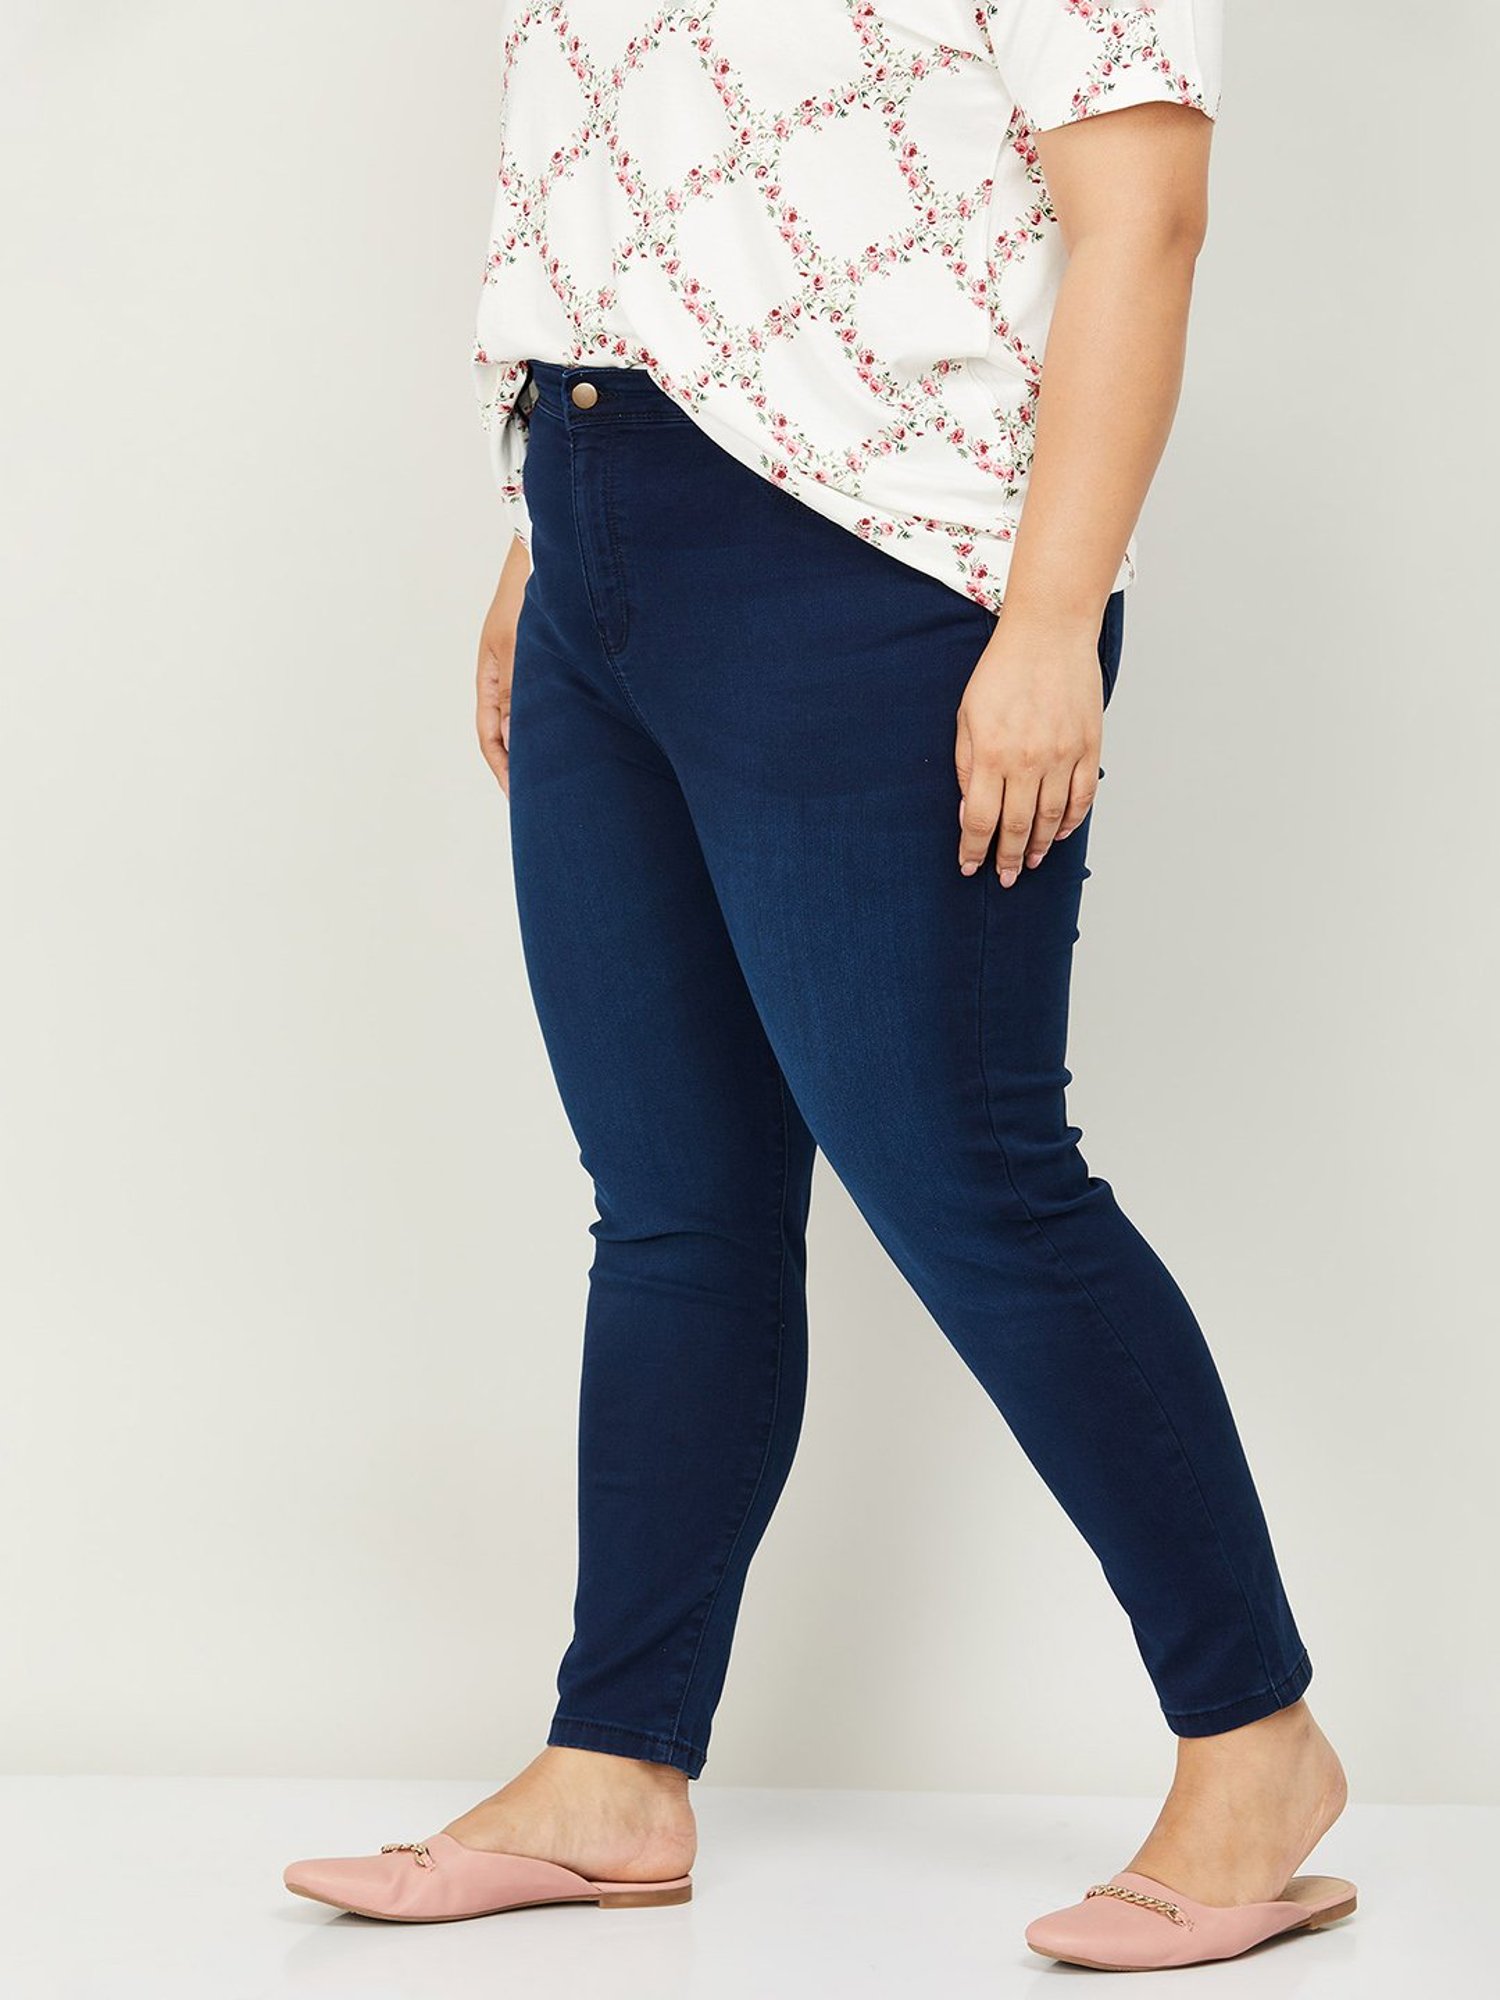 Buy Blue Jeans & Jeggings for Women by Nexus by lifestyle Online